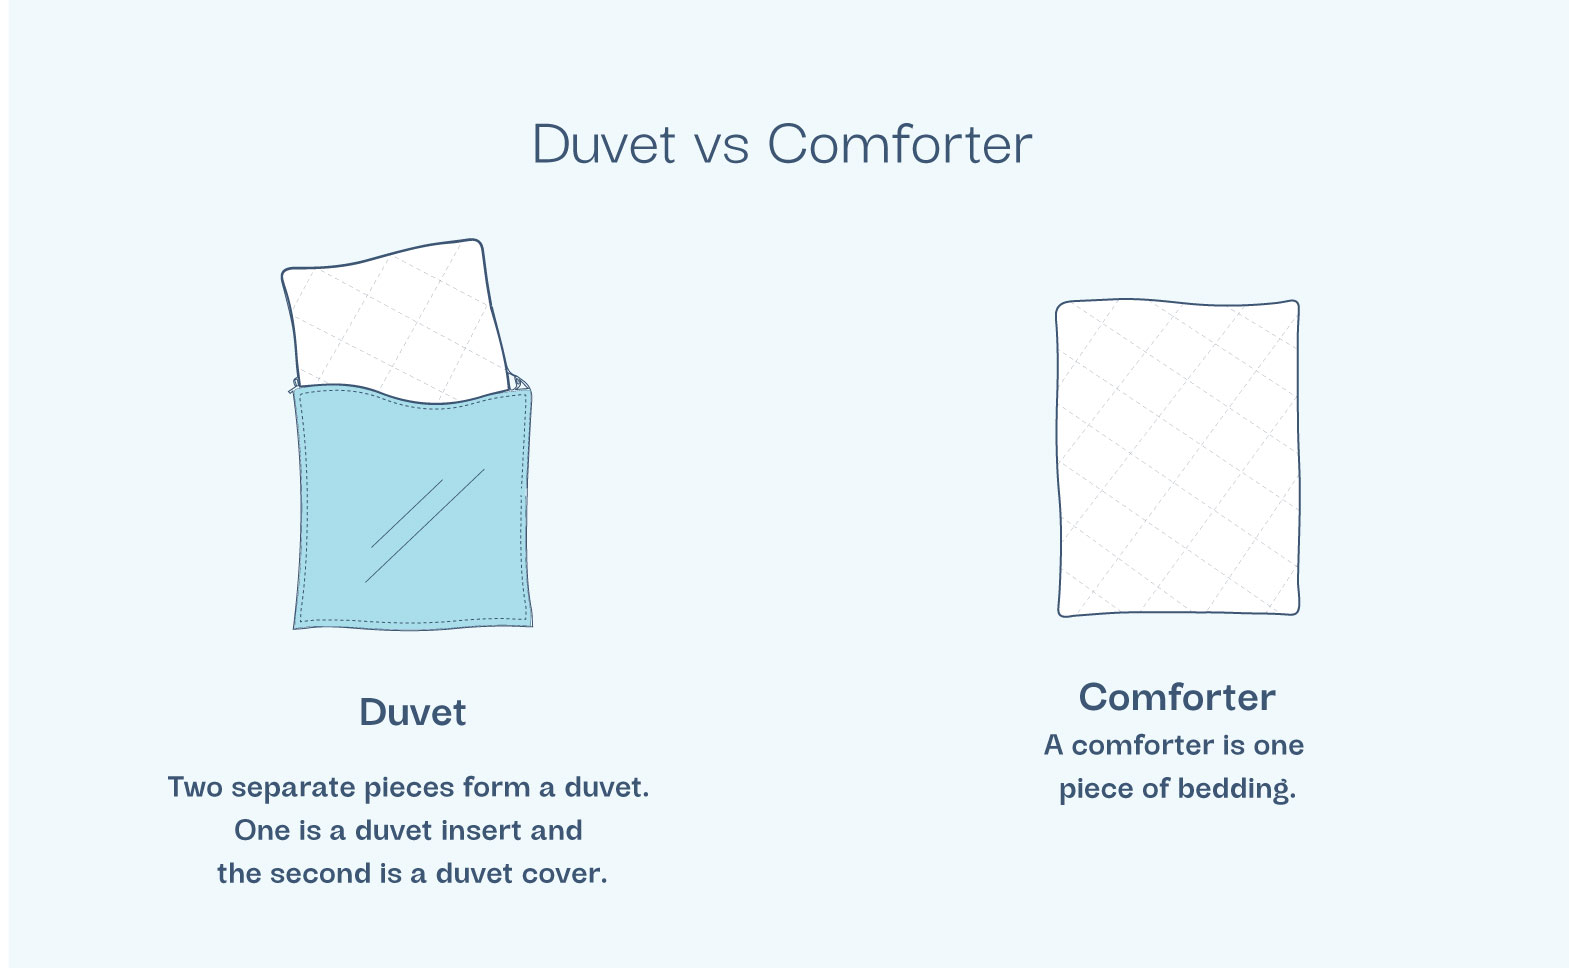 Quilt vs Comforter - Pros and Cons of Comforters vs Quilts